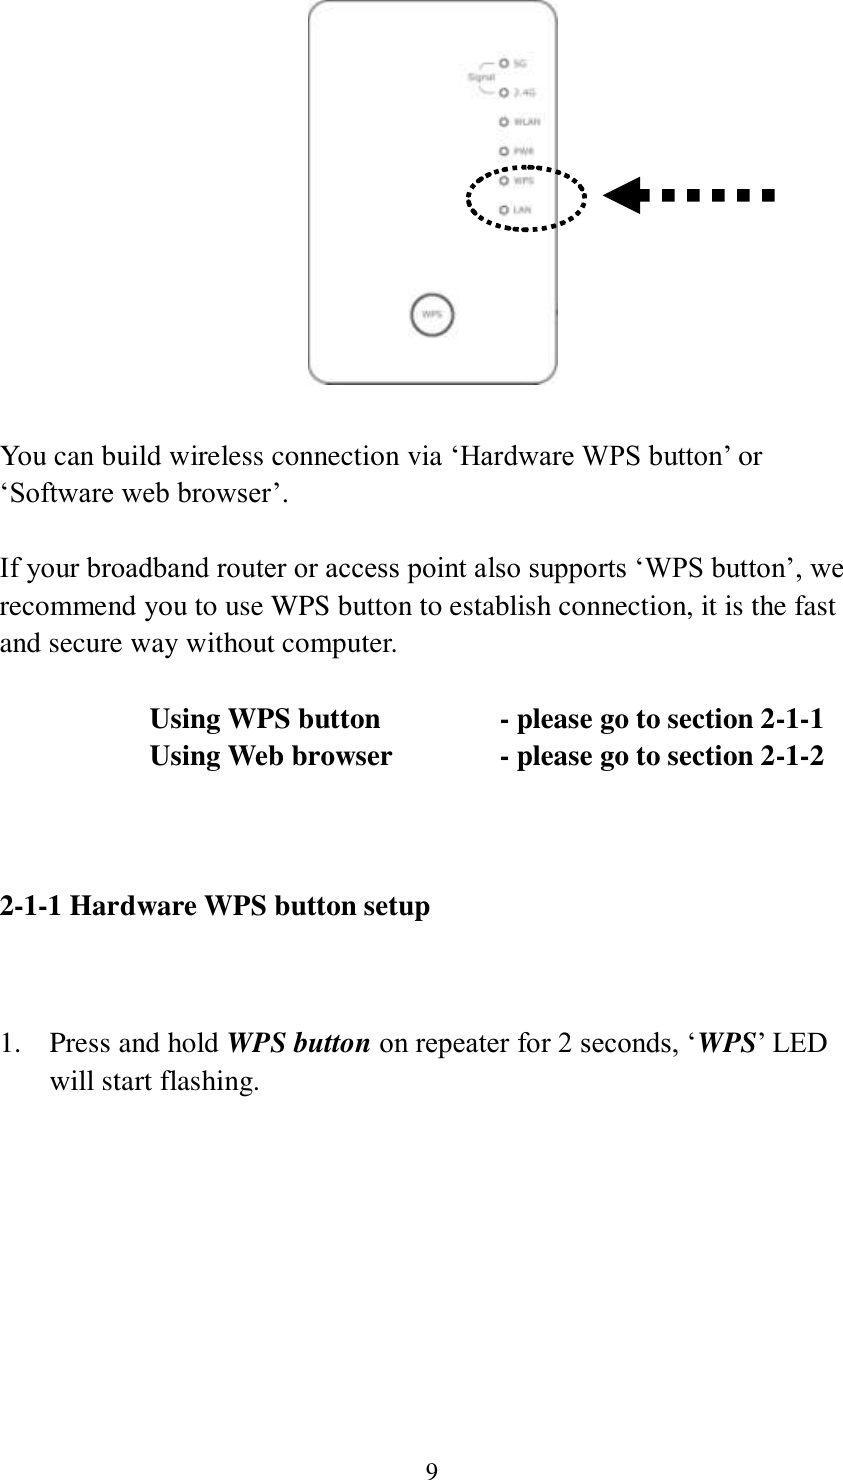 9   You can build wireless connection via ‘Hardware WPS button’ or ‘Software web browser’.  If your broadband router or access point also supports ‘WPS button’, we recommend you to use WPS button to establish connection, it is the fast and secure way without computer.    Using WPS button      - please go to section 2-1-1       Using Web browser     - please go to section 2-1-2    2-1-1 Hardware WPS button setup   1. Press and hold WPS button on repeater for 2 seconds, ‘WPS’ LED will start flashing.  